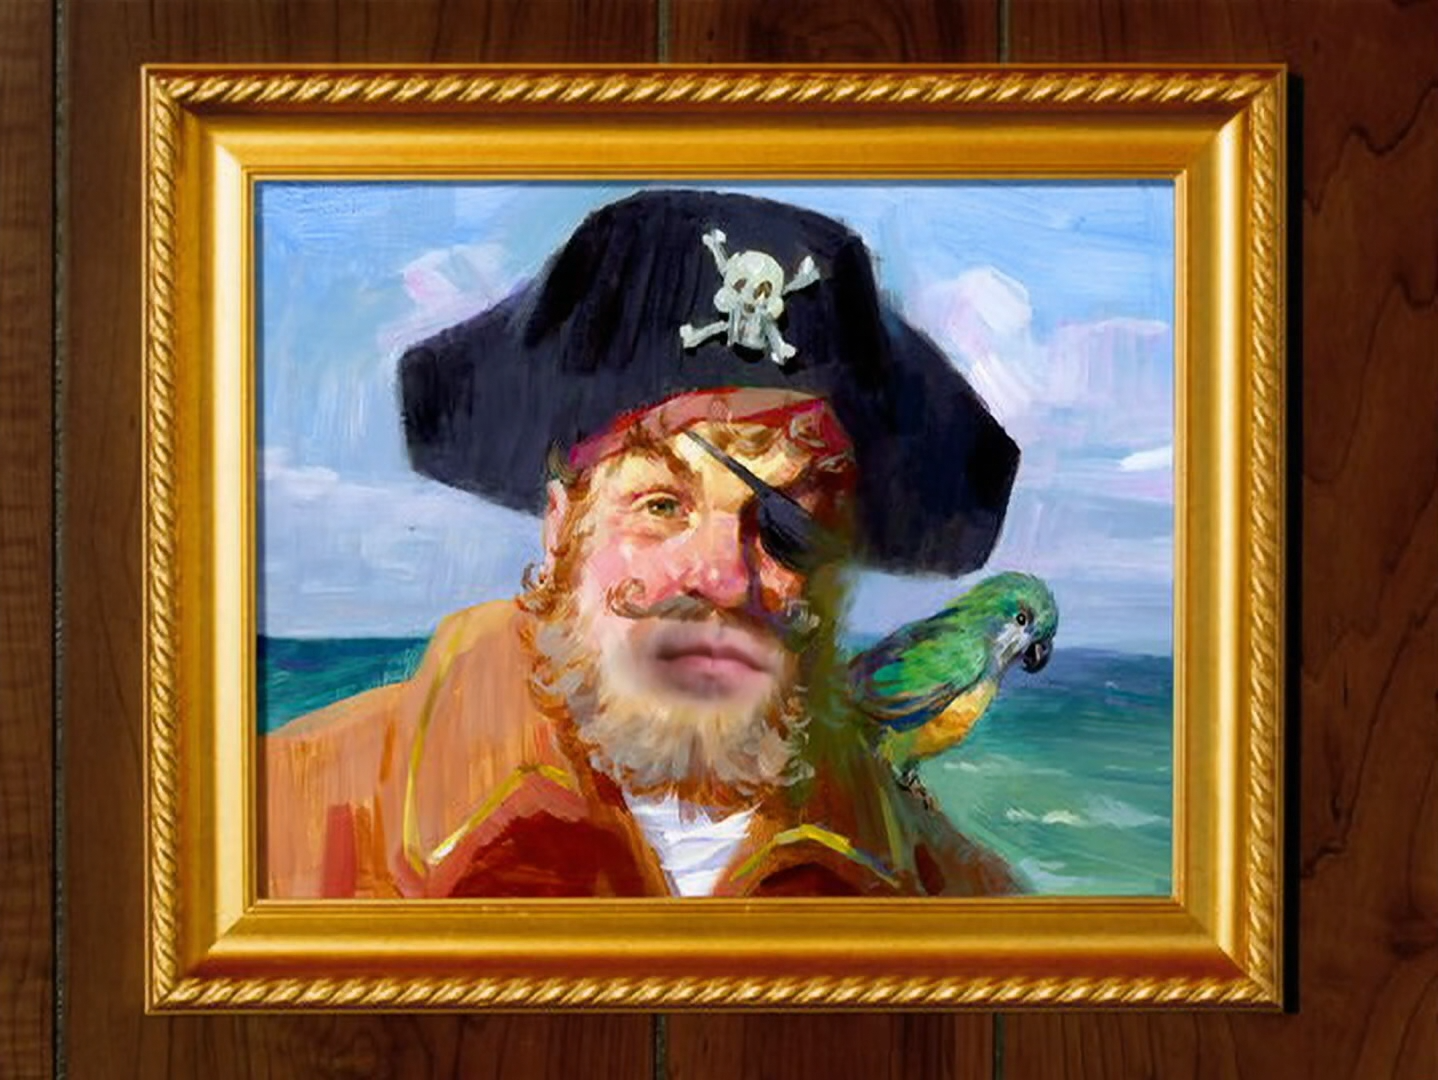 Spongebob Squarepants Painty The Pirate Patchy Painting Wall Art  Nickelodeon New